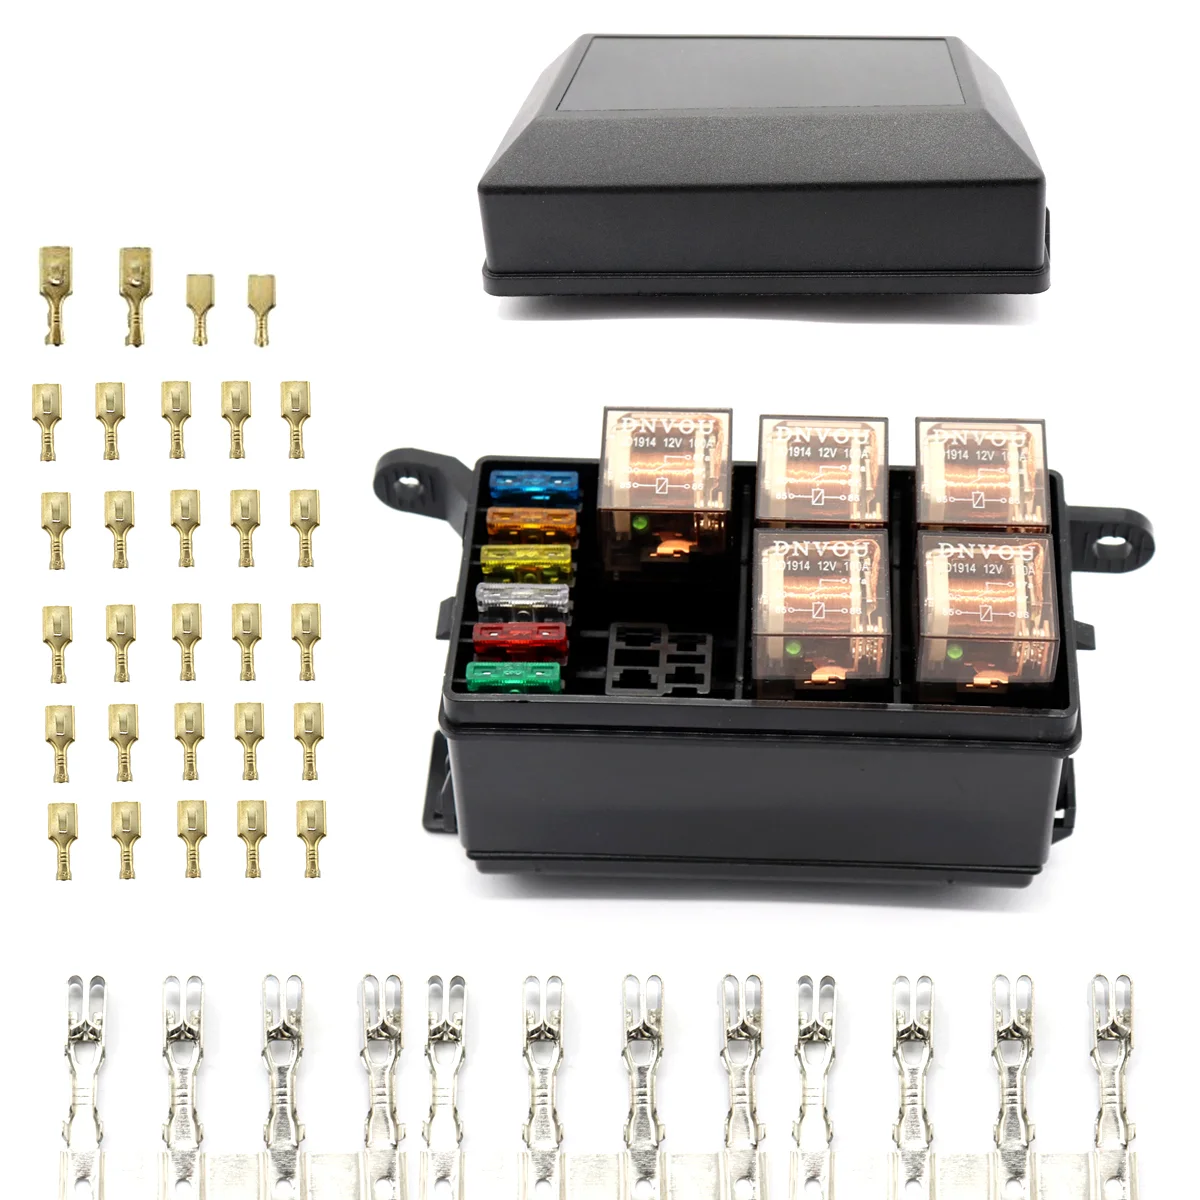 

6-Way 12V Fuse Holder Box with 5PCS 5Pin 12V 100A Relays and 1PC 12V 40A Relays for Car Truck Trailer Boat (Black)